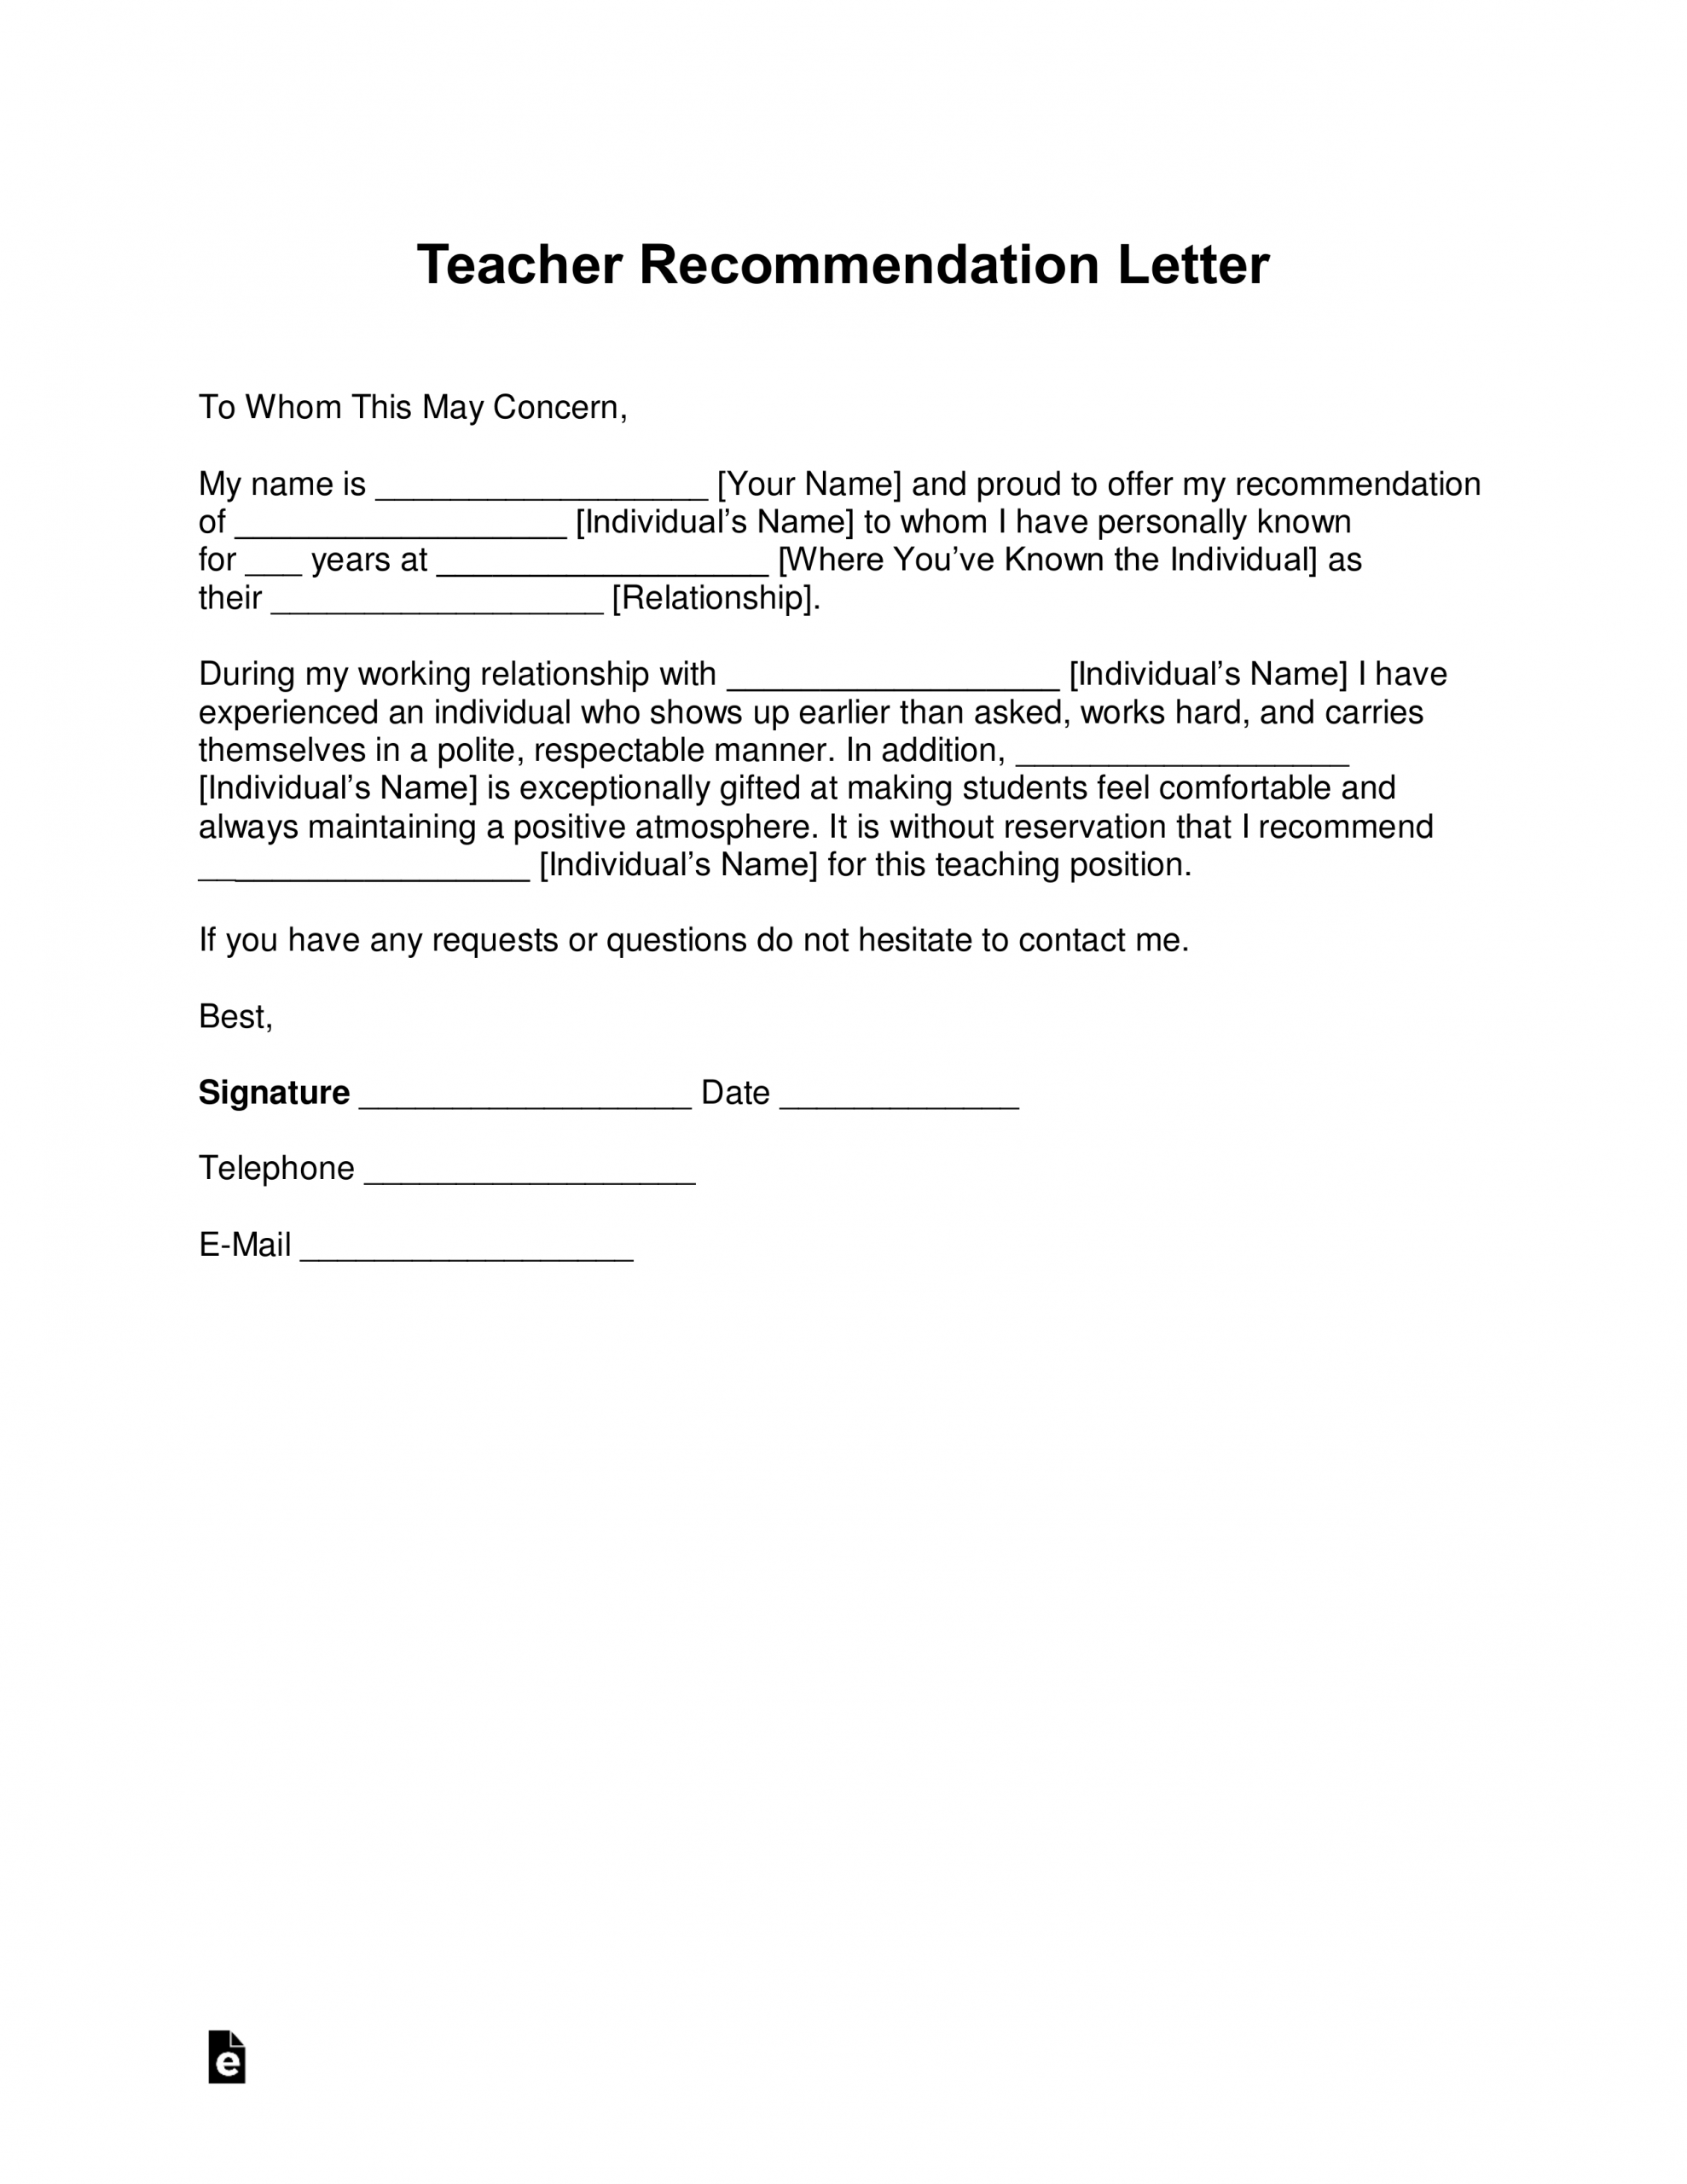 Free Teacher Recommendation Letter Template With Samples within size 2550 X 3301